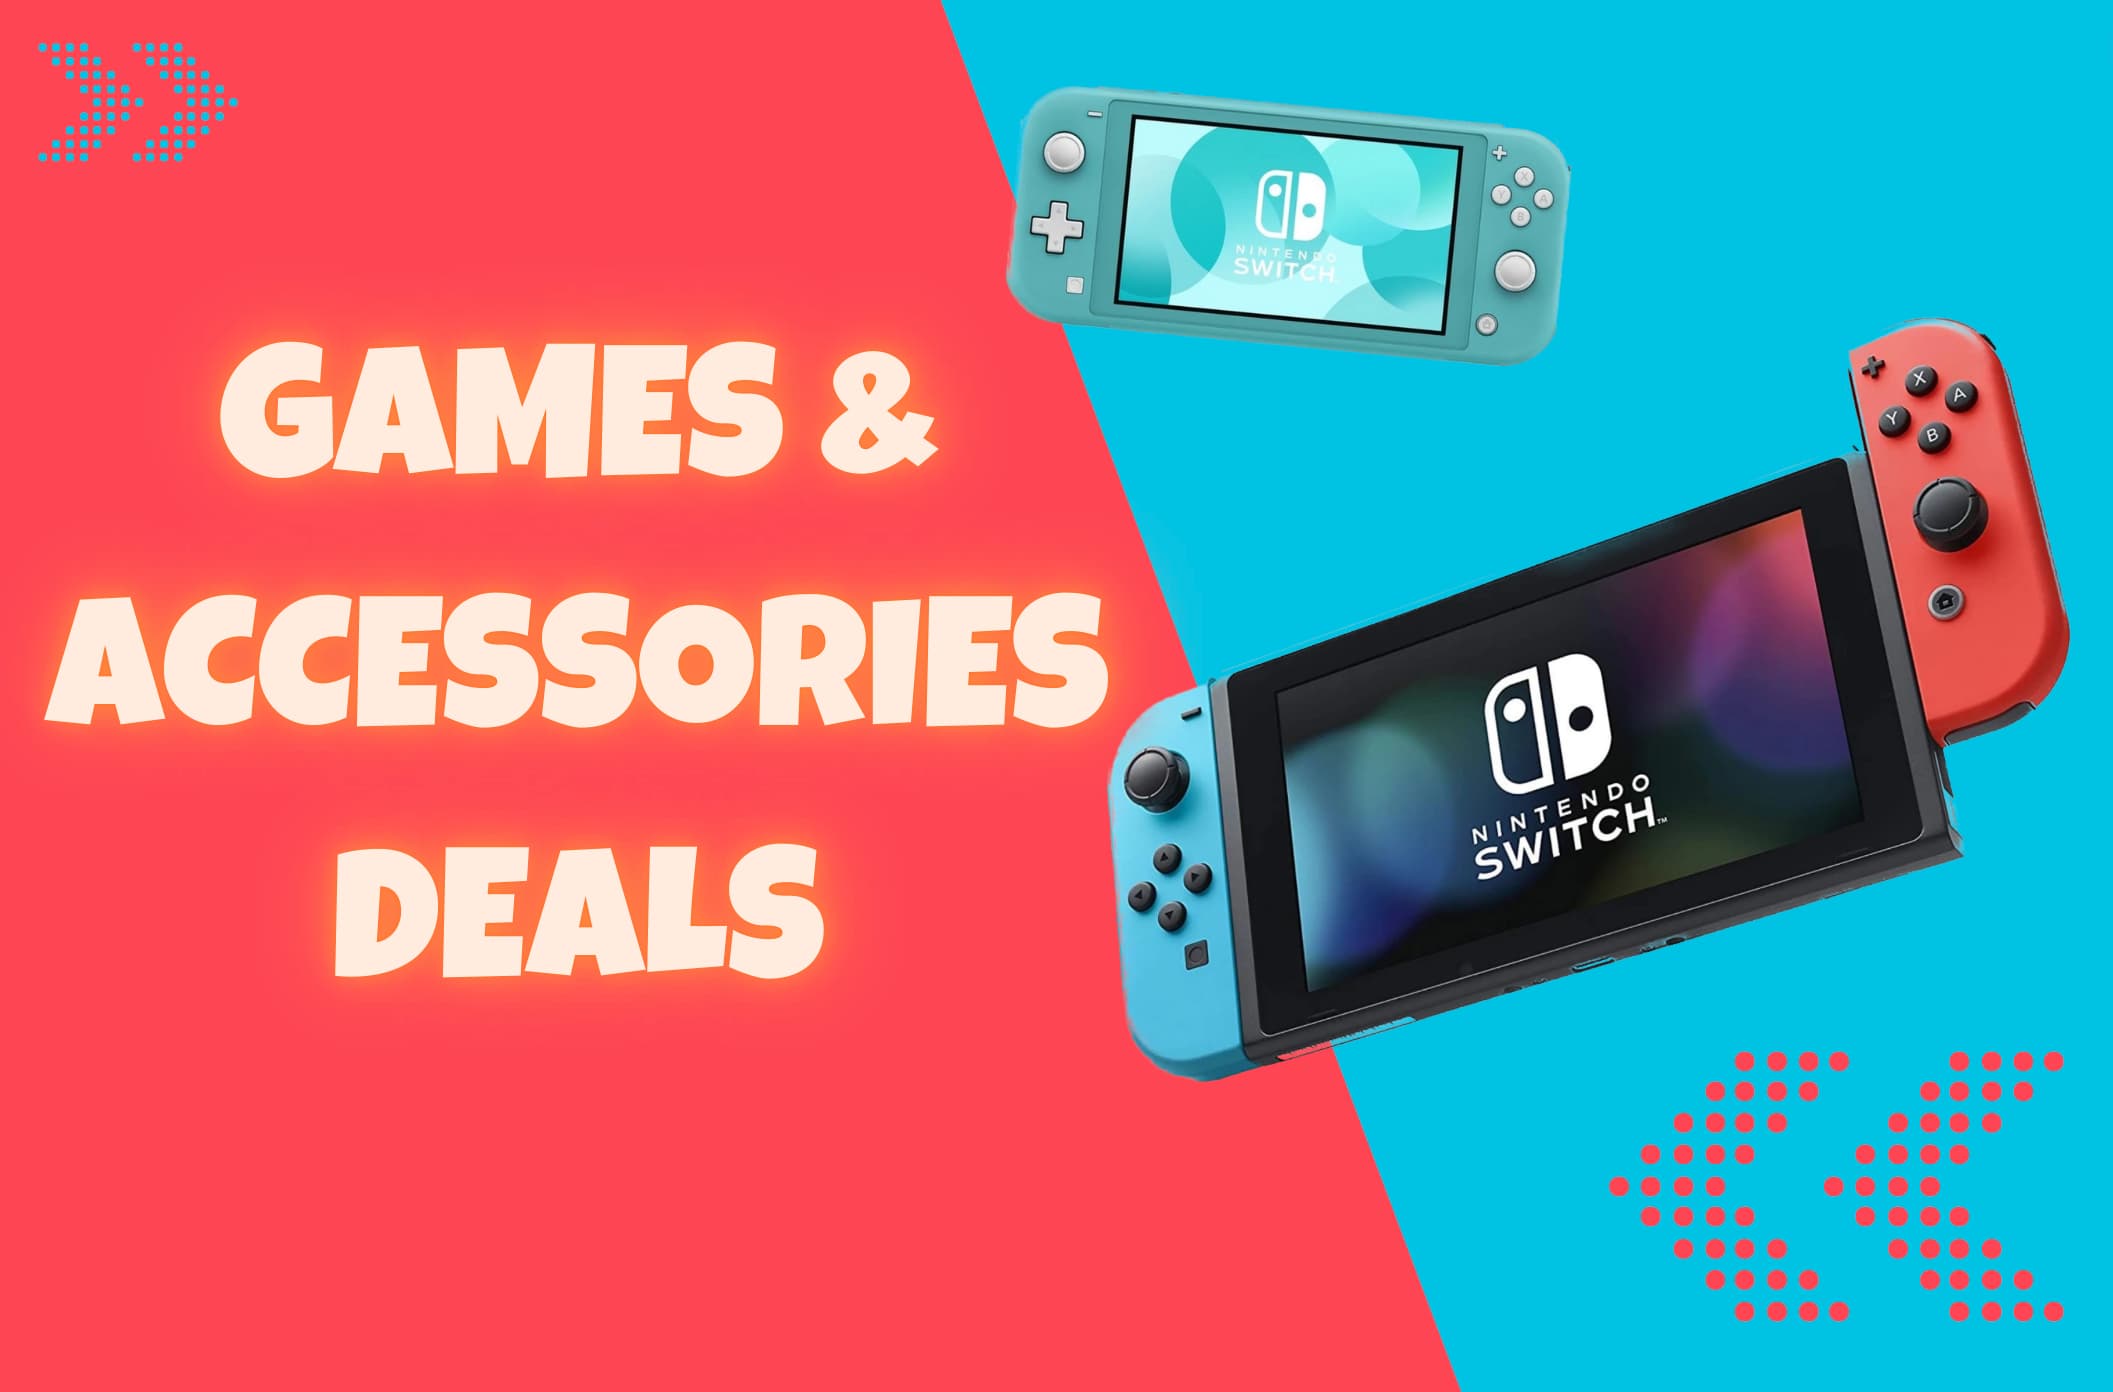 Nintendo Switch deals to help you maintain an exciting start to the new year